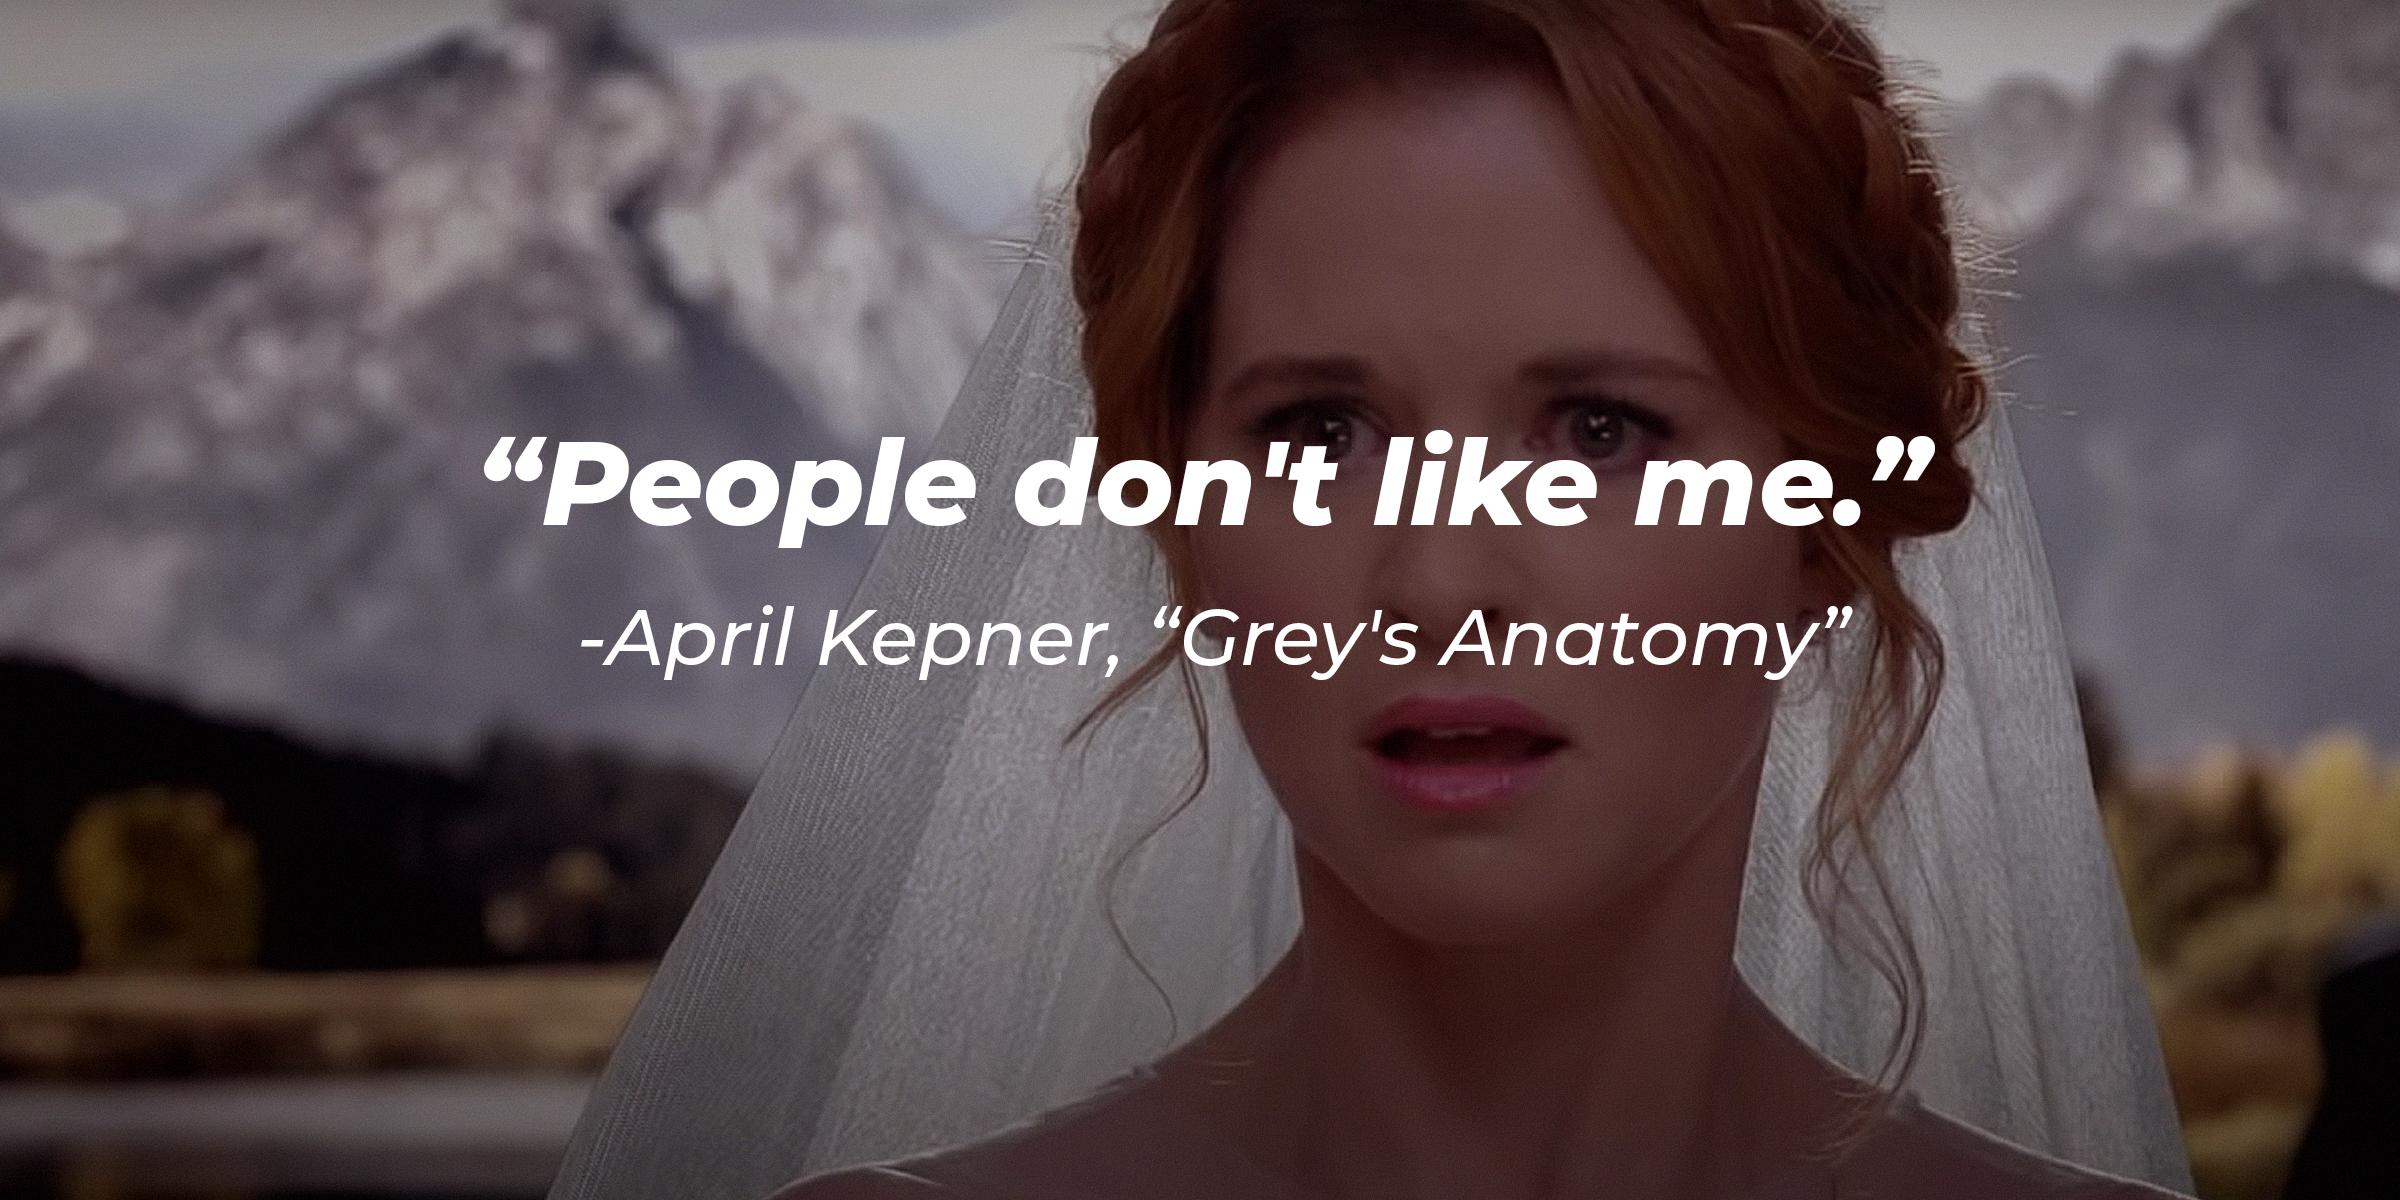 An image of "Grey's Anatomy" character April Kepner with the quote, "People don't like me." | Source: youtube.com/ABCNetwork